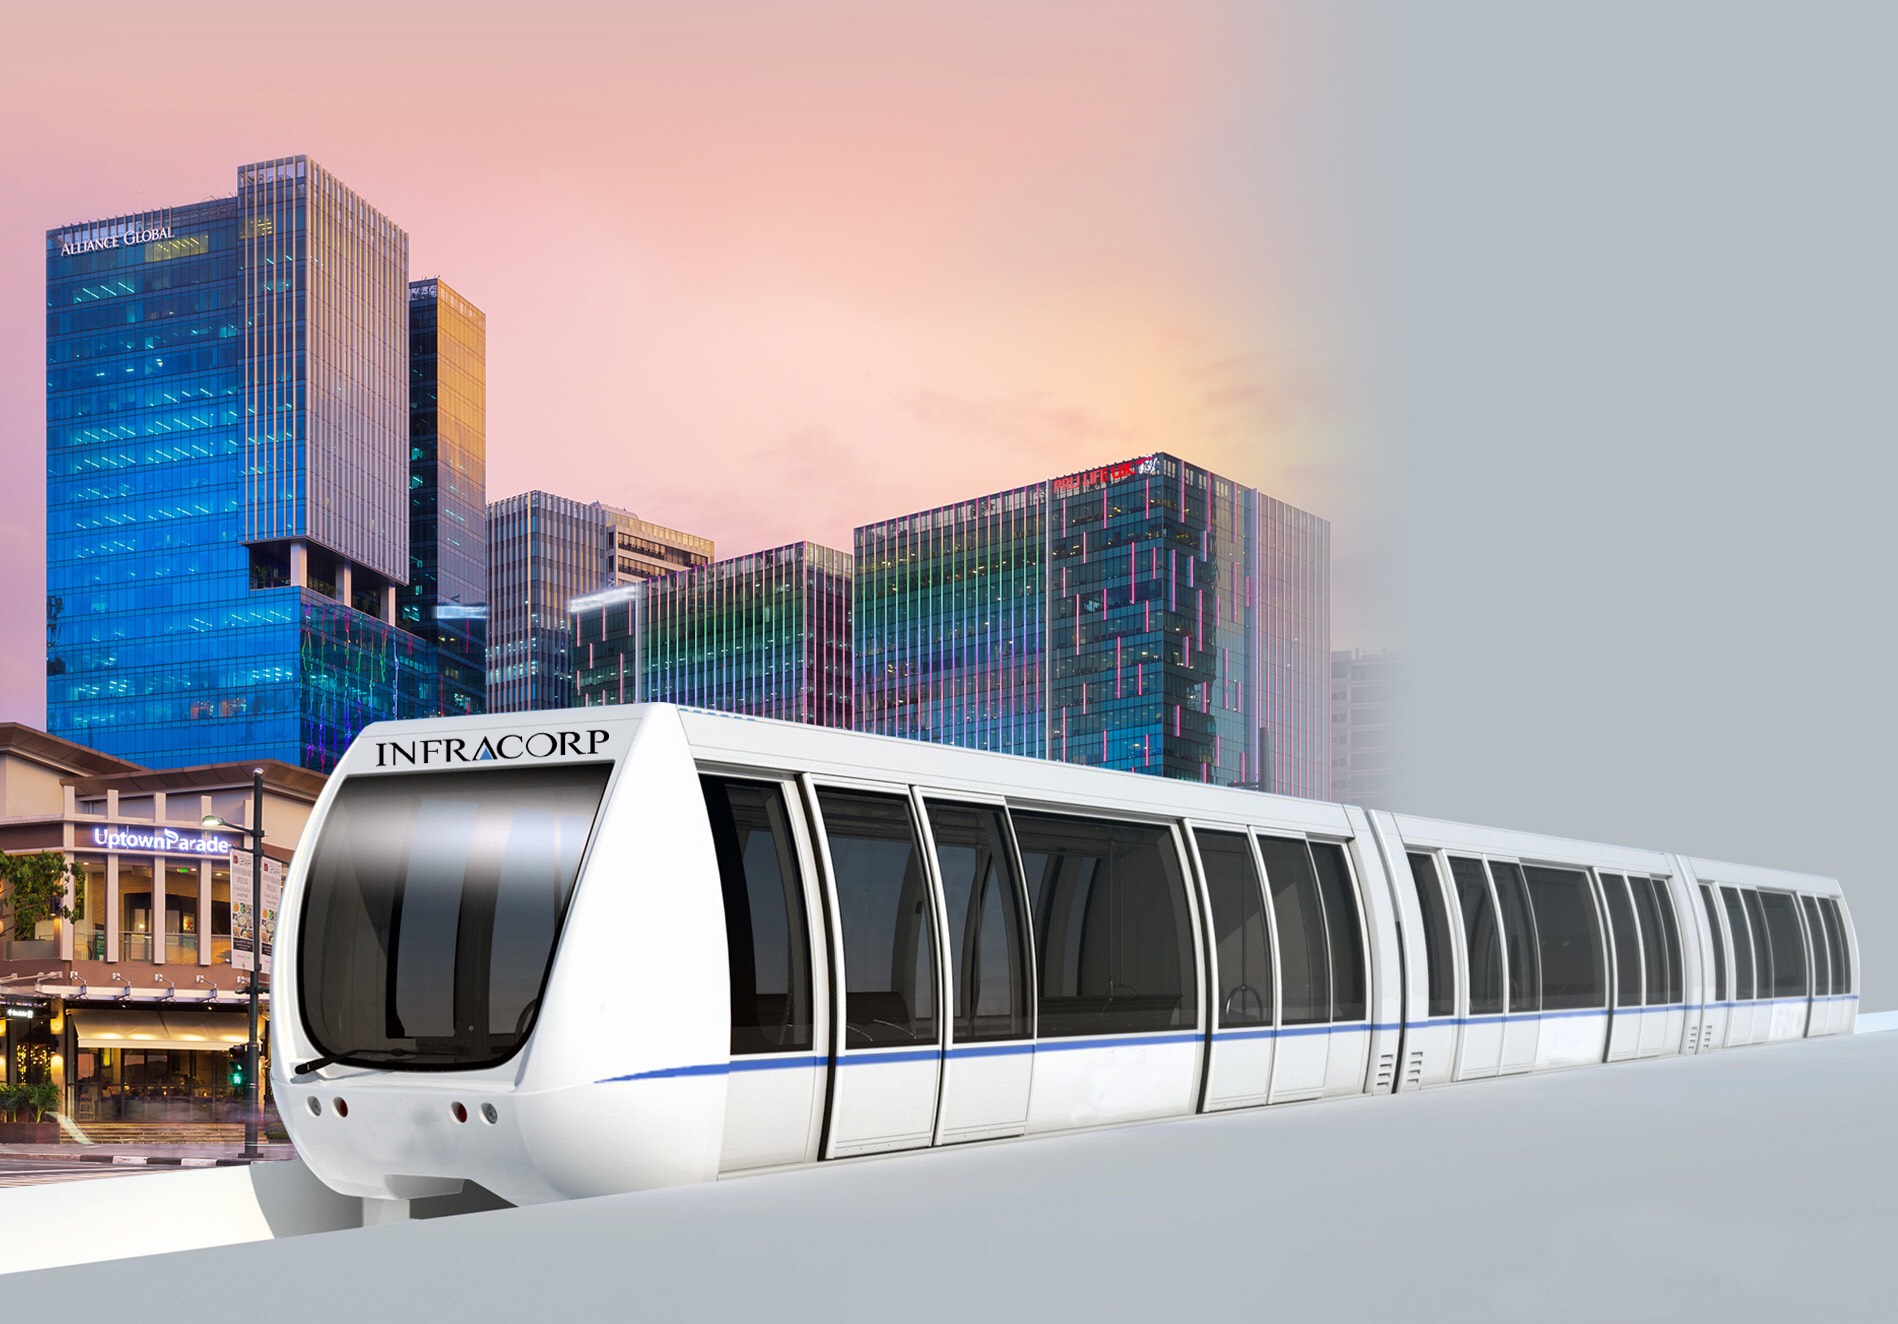 COMING SOON? A rendering of the proposed Skytrain project. If approved, Infracorp says it will take 3 years to build. Image from AGI 